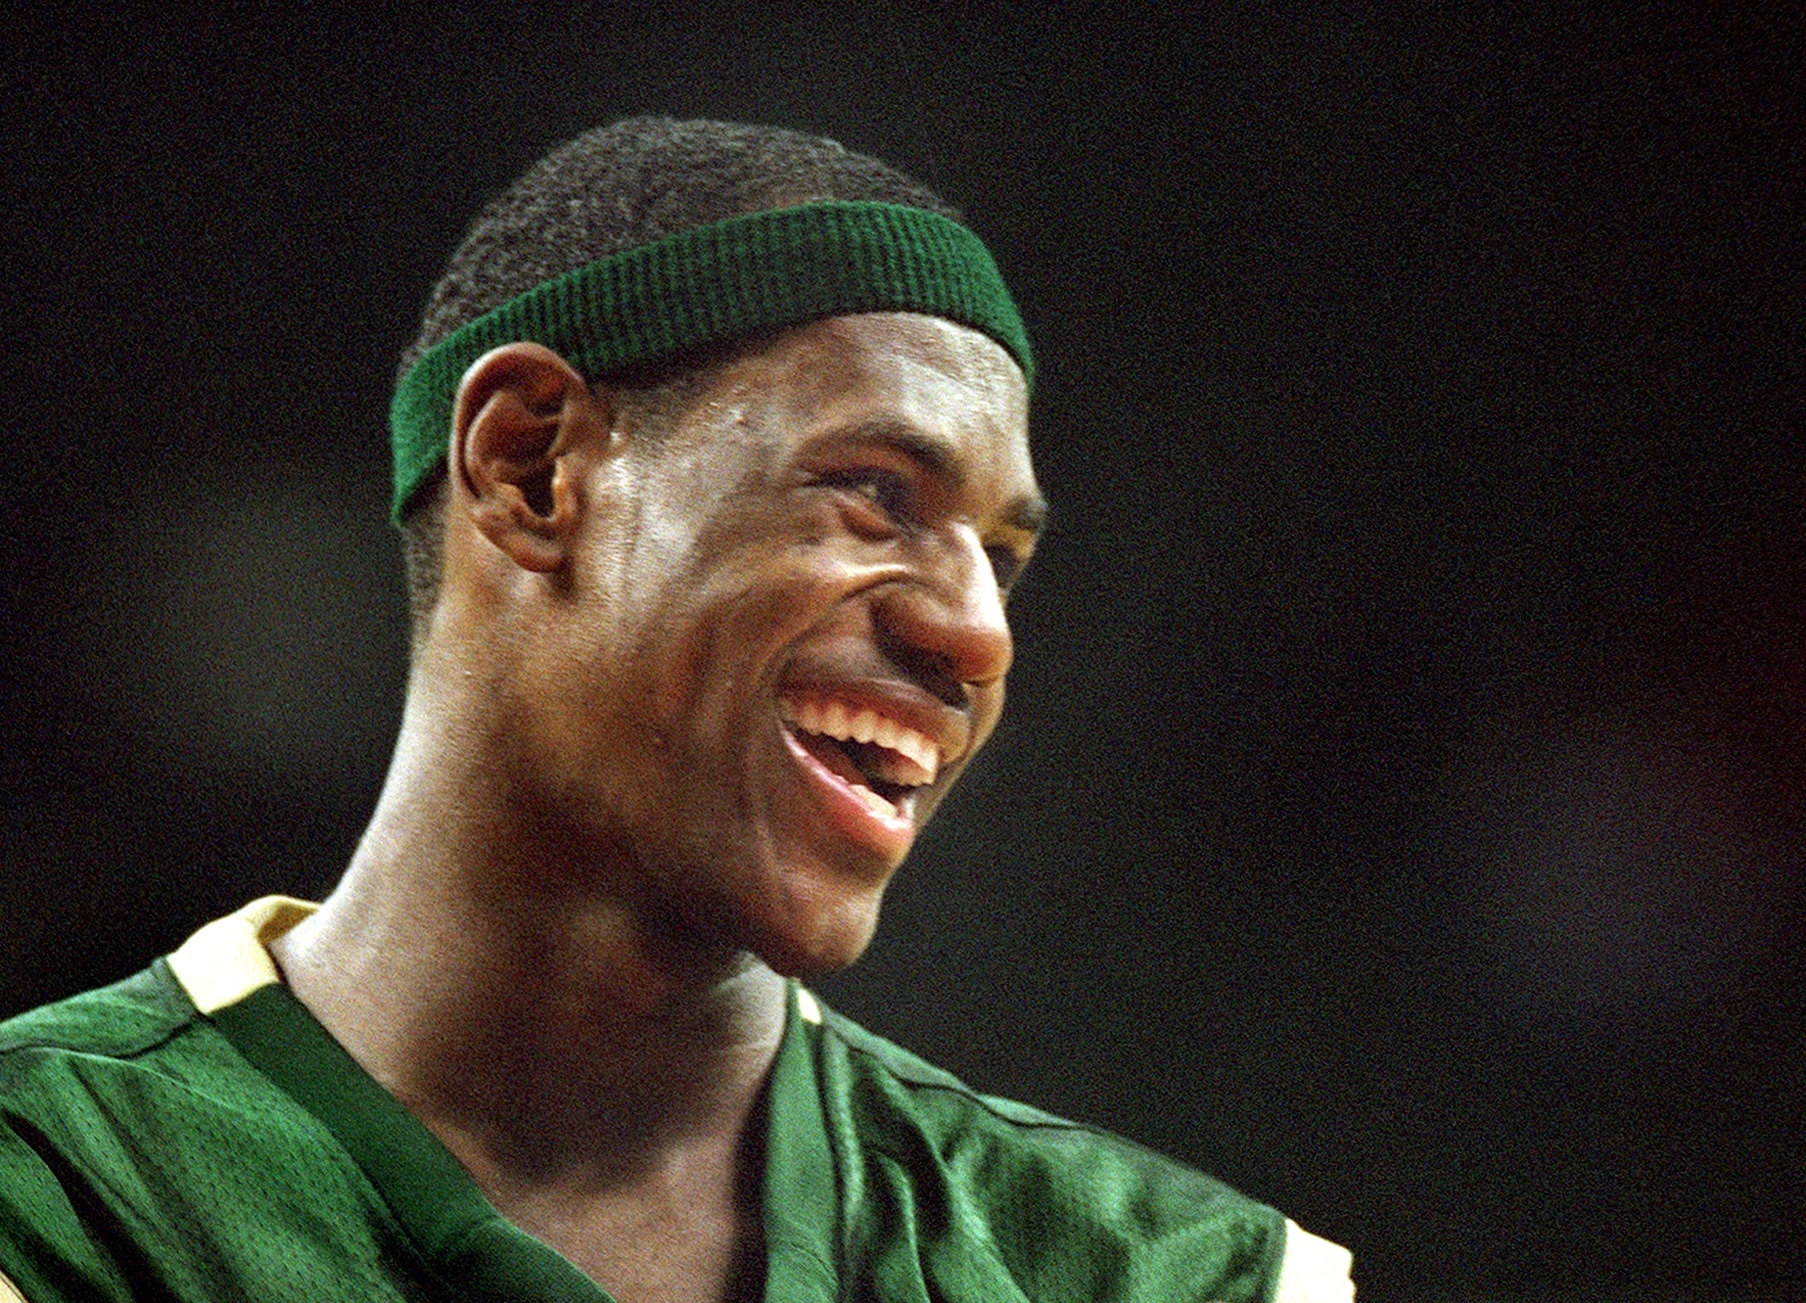 Lebron James's High School Jersey Sells at Auction for $187,500